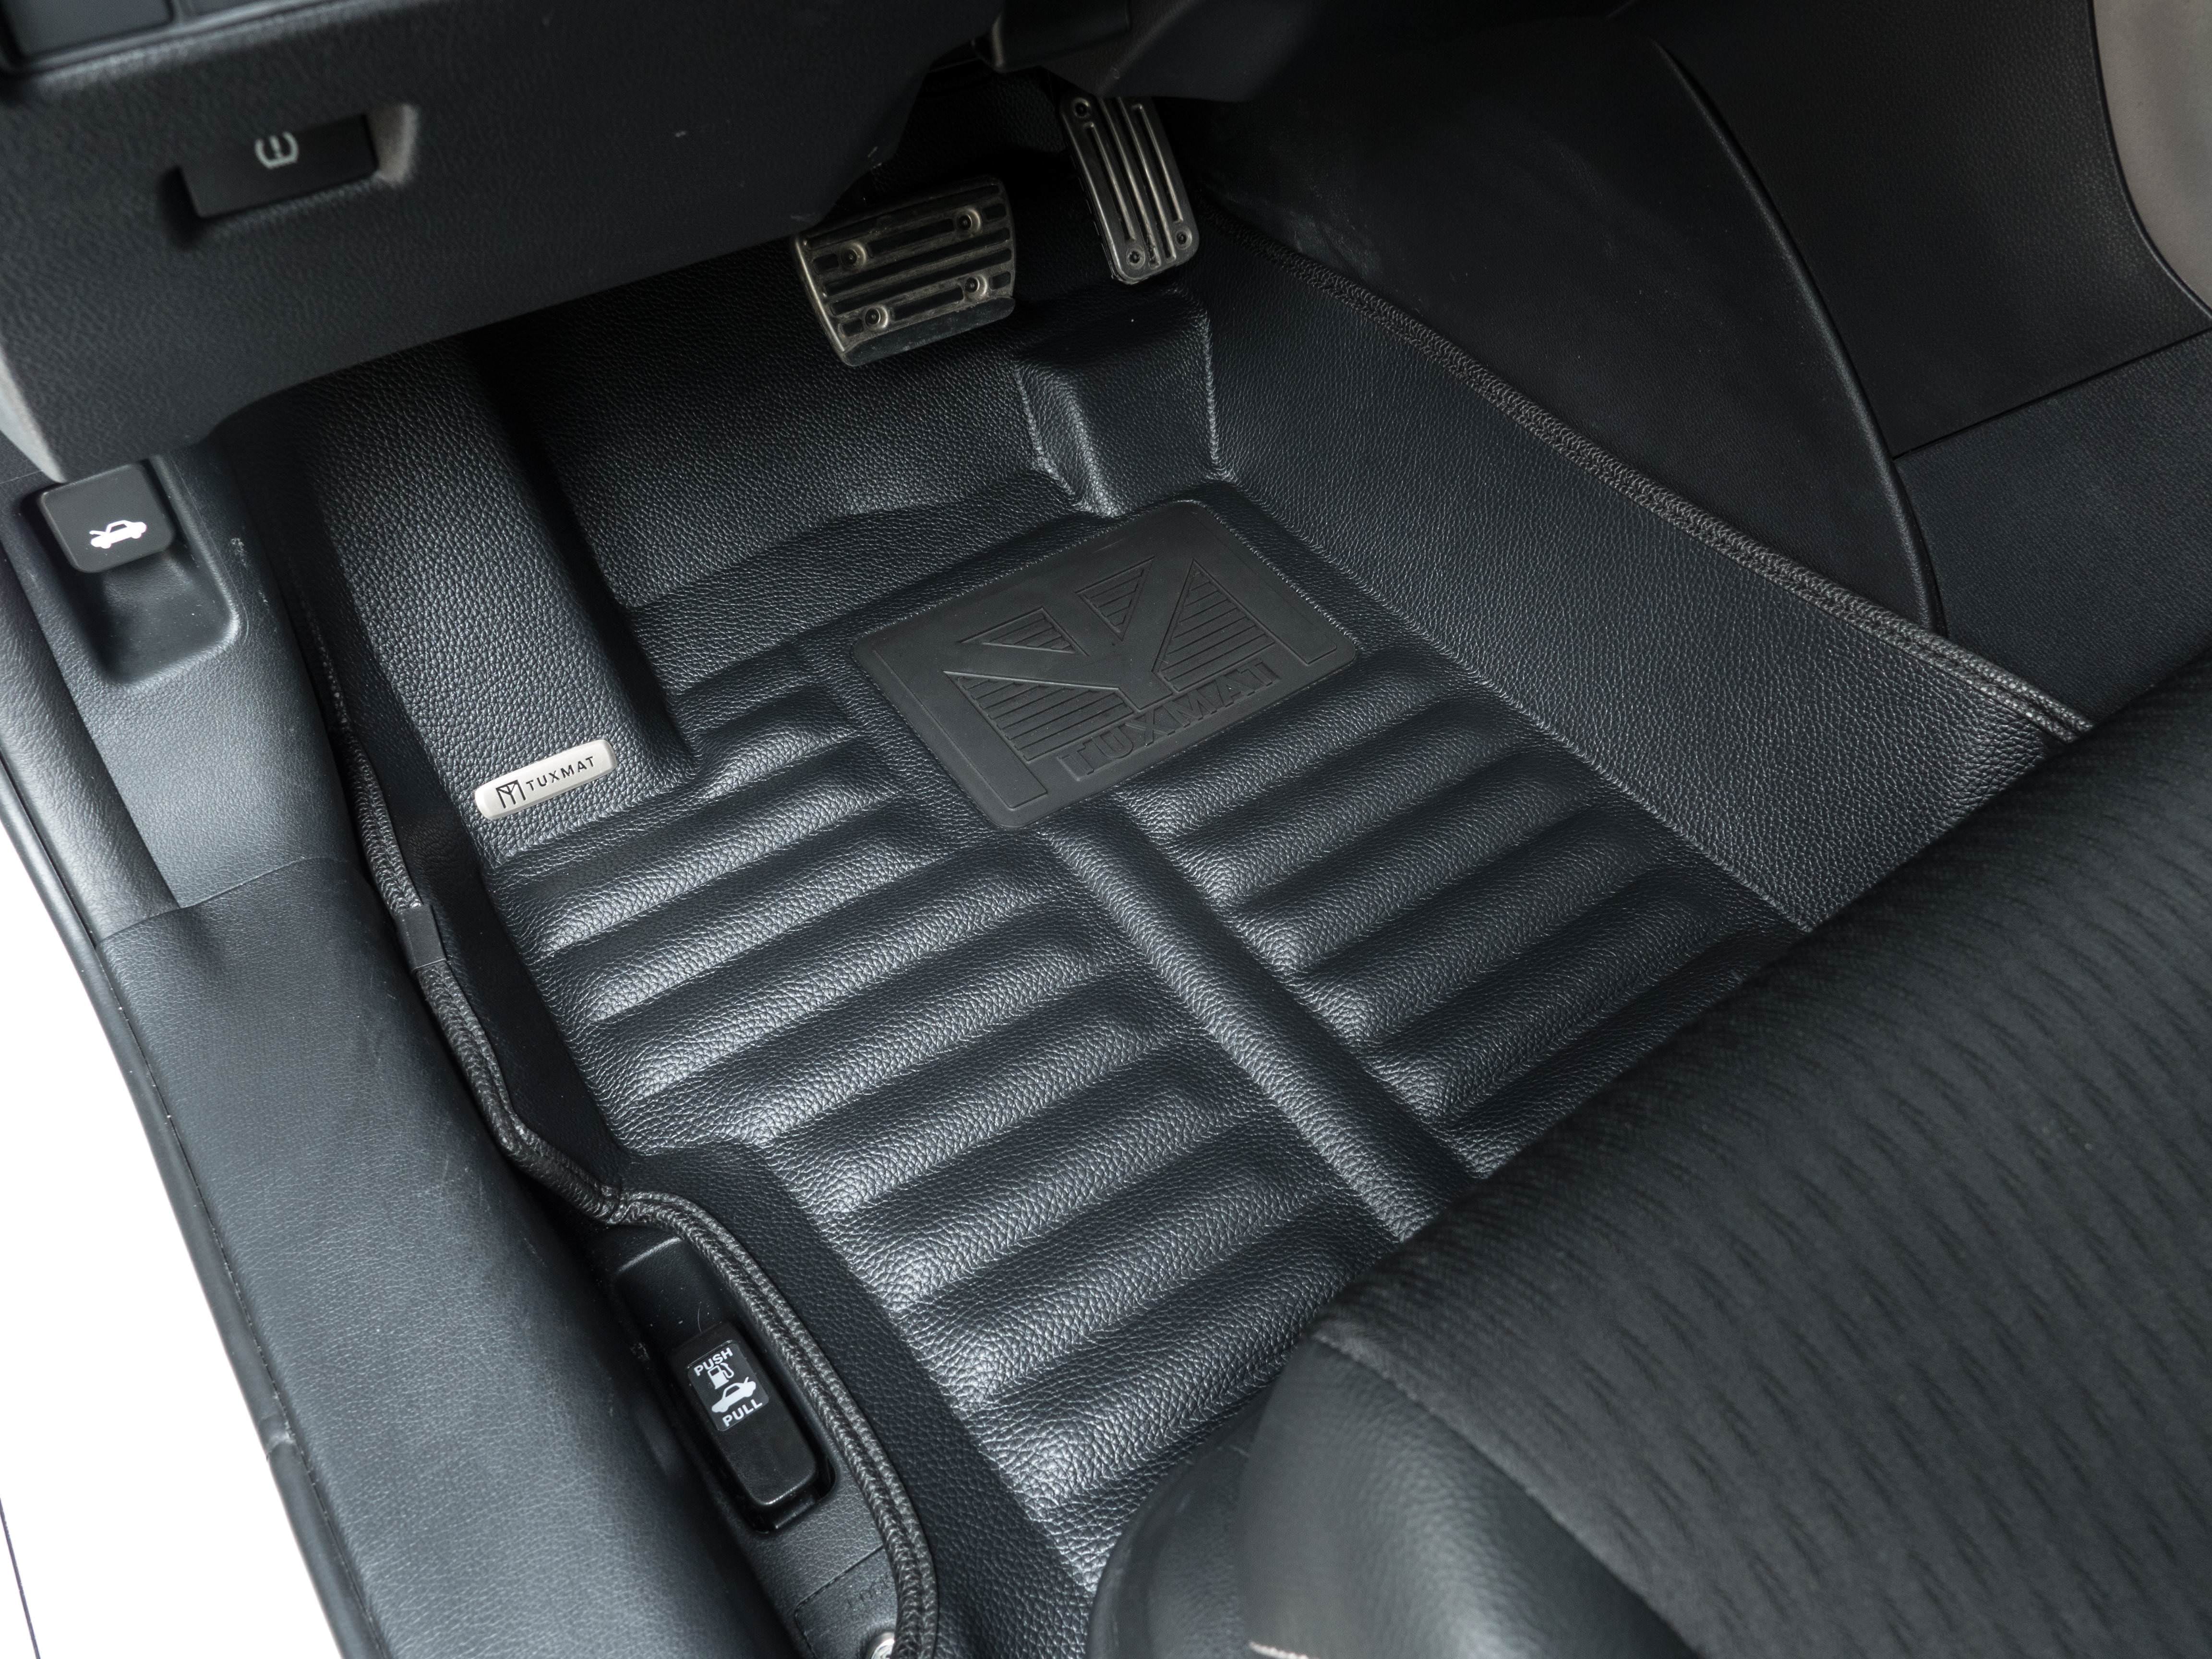 Waterproof Largest Coverage Also Look Great in the Summer. The Best Toyota RAV4 Accessory. The Ultimate Winter Mats All Weather TuxMat Custom Car Floor Mats for Toyota RAV4 Hybrid 2013-2018 Models - Laser Measured Full Set - Black